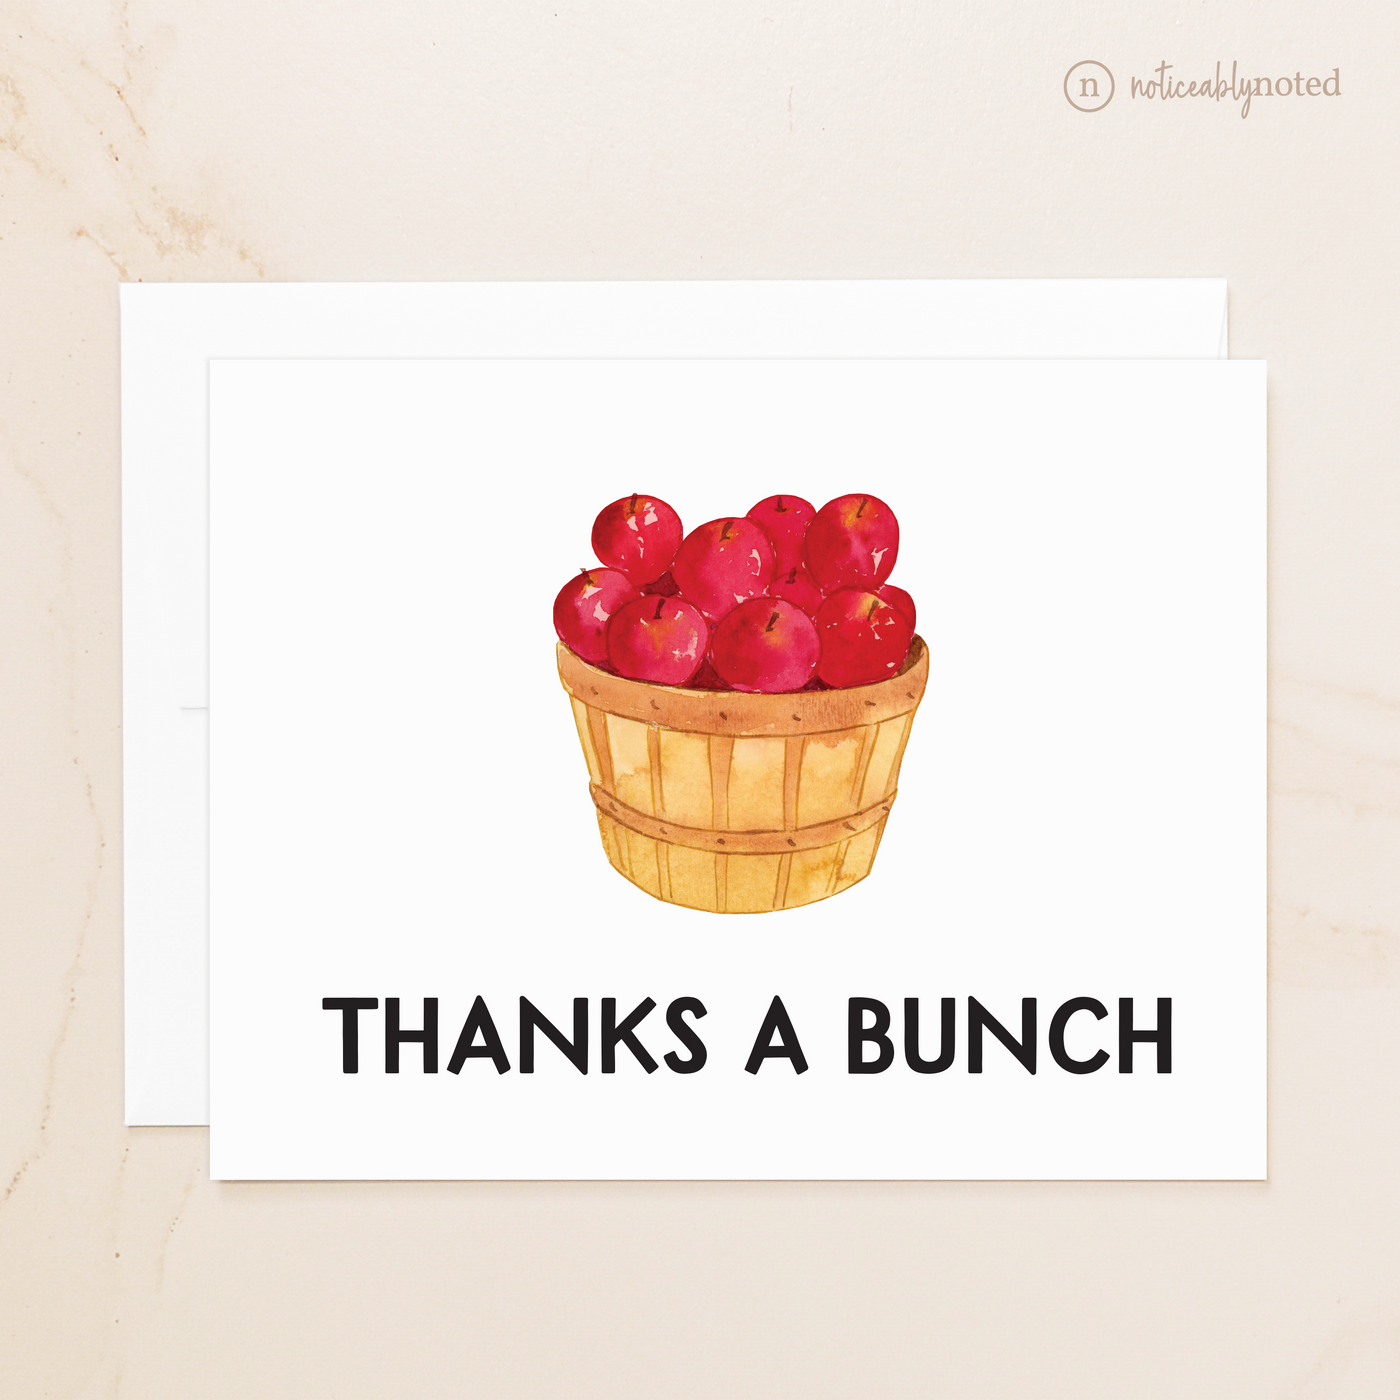 Apple Folded Thank You Cards on White Envelope | Noticeably Noted